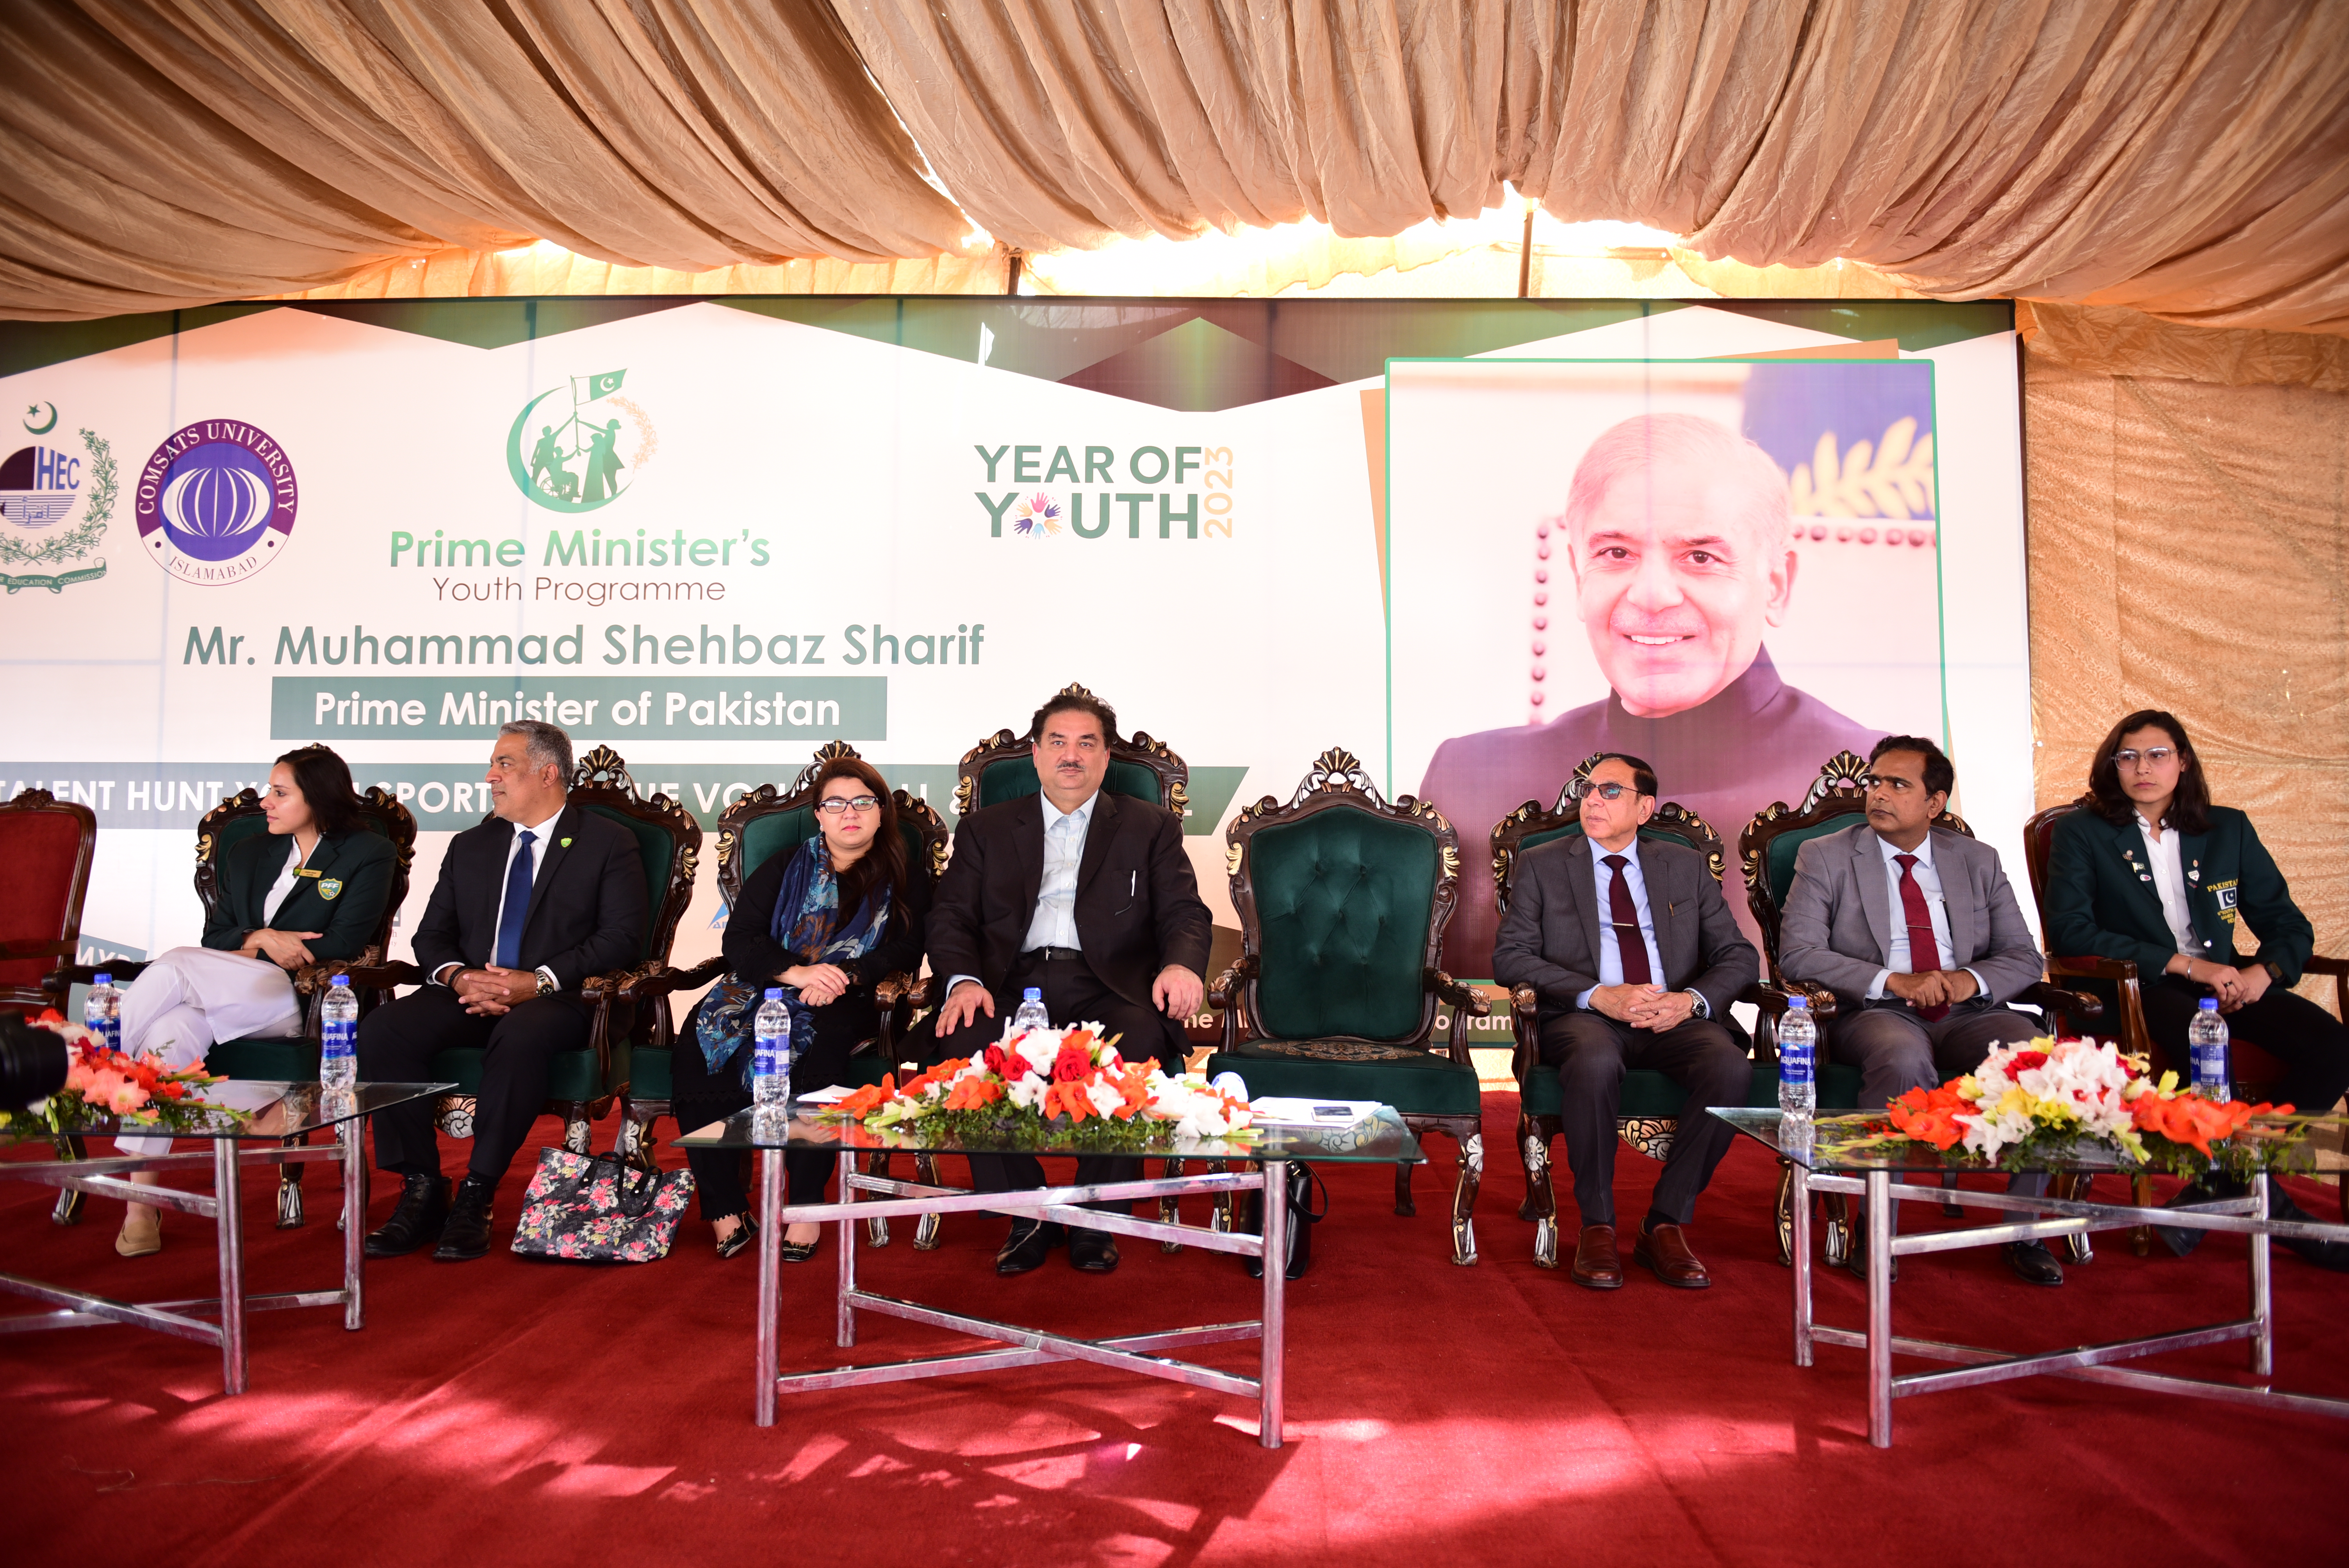 During the "Week of Youth" organized under the Prime Minister's Youth Program, Football and volleyball talent hunt Inauguration ceremony has been held at COMSATS University Islamabad. Federal Minister of Power & Energy Khurram Dastgir attended the event as a special guest.



